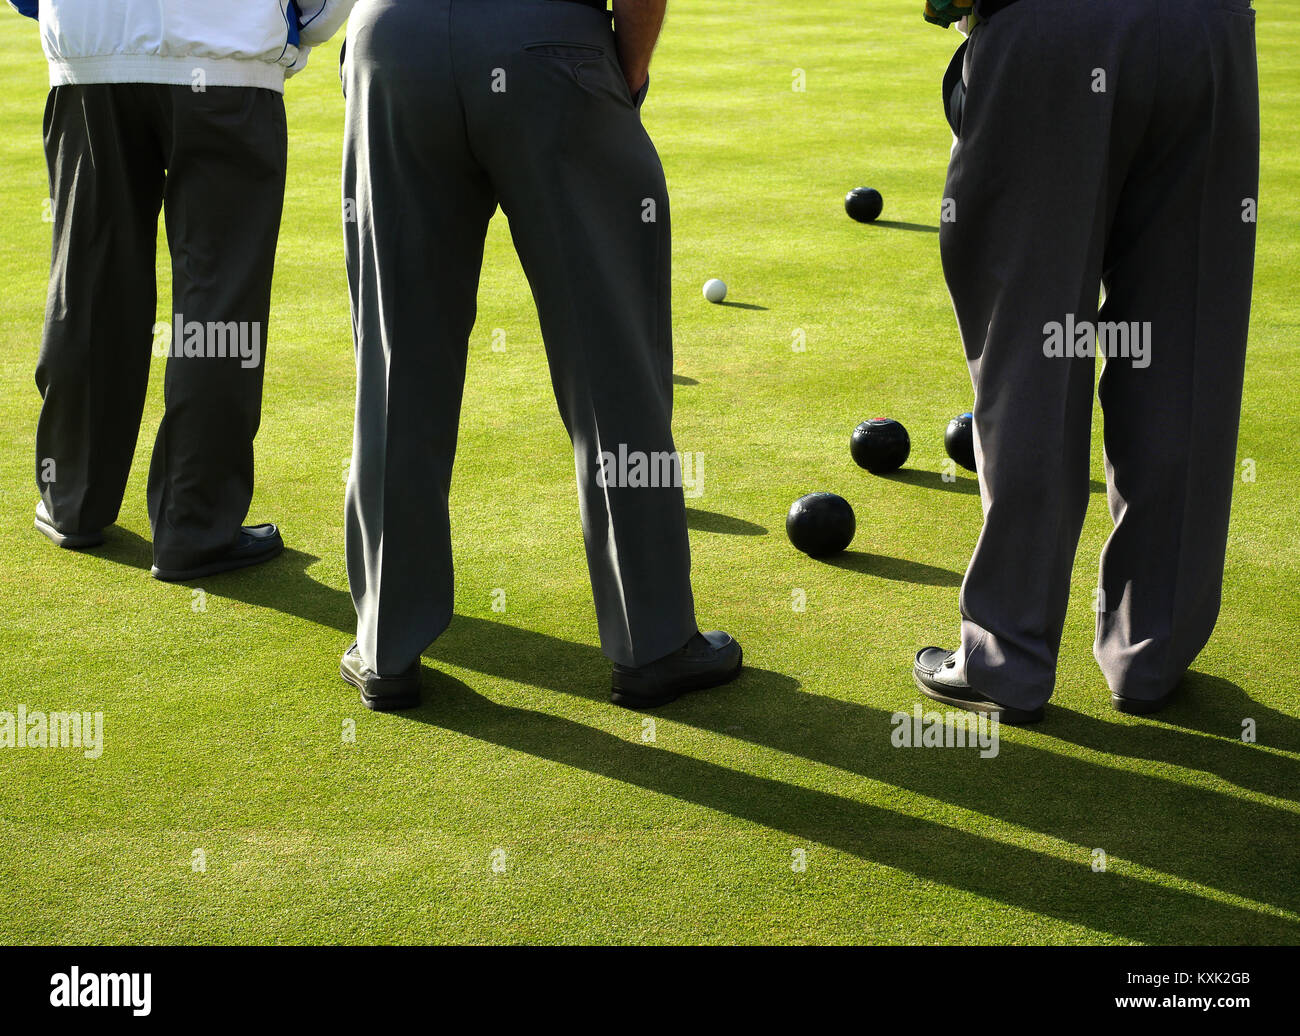 Bowlers studying the position of the bowls at one end, Perth Bowling Club, Perth, Scotland, UK Stock Photo